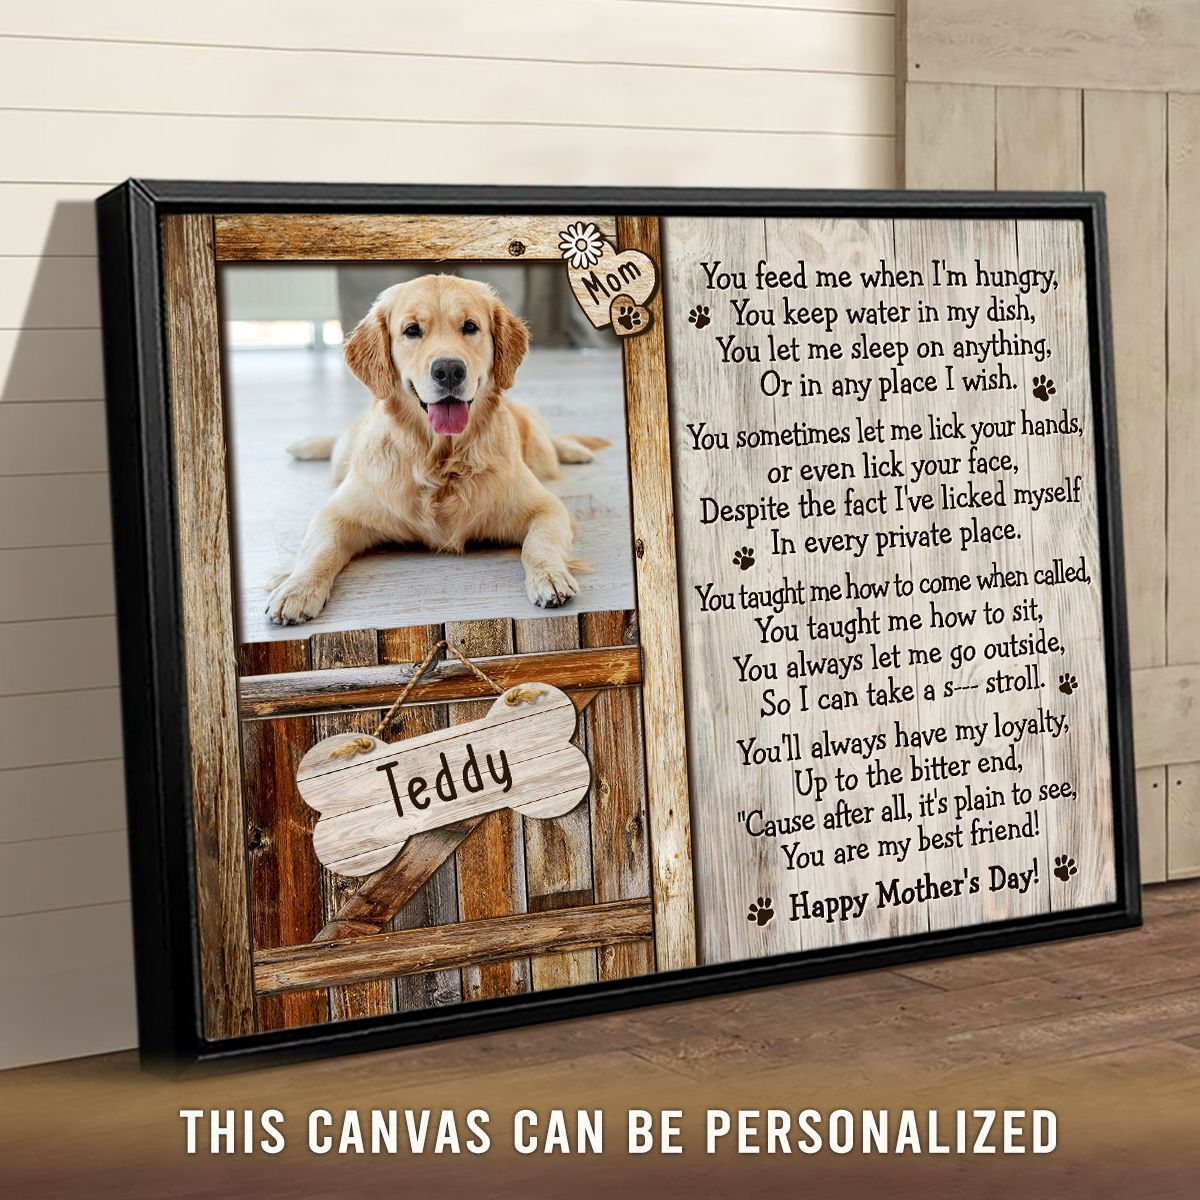 https://images.ohcanvas.com/ohcanvas_com/2022/03/15024209/mothers-day-gift-for-dog-mom-personalized-pet-photo-canvas-print-you-feed-me-when-im-hungry02.jpg